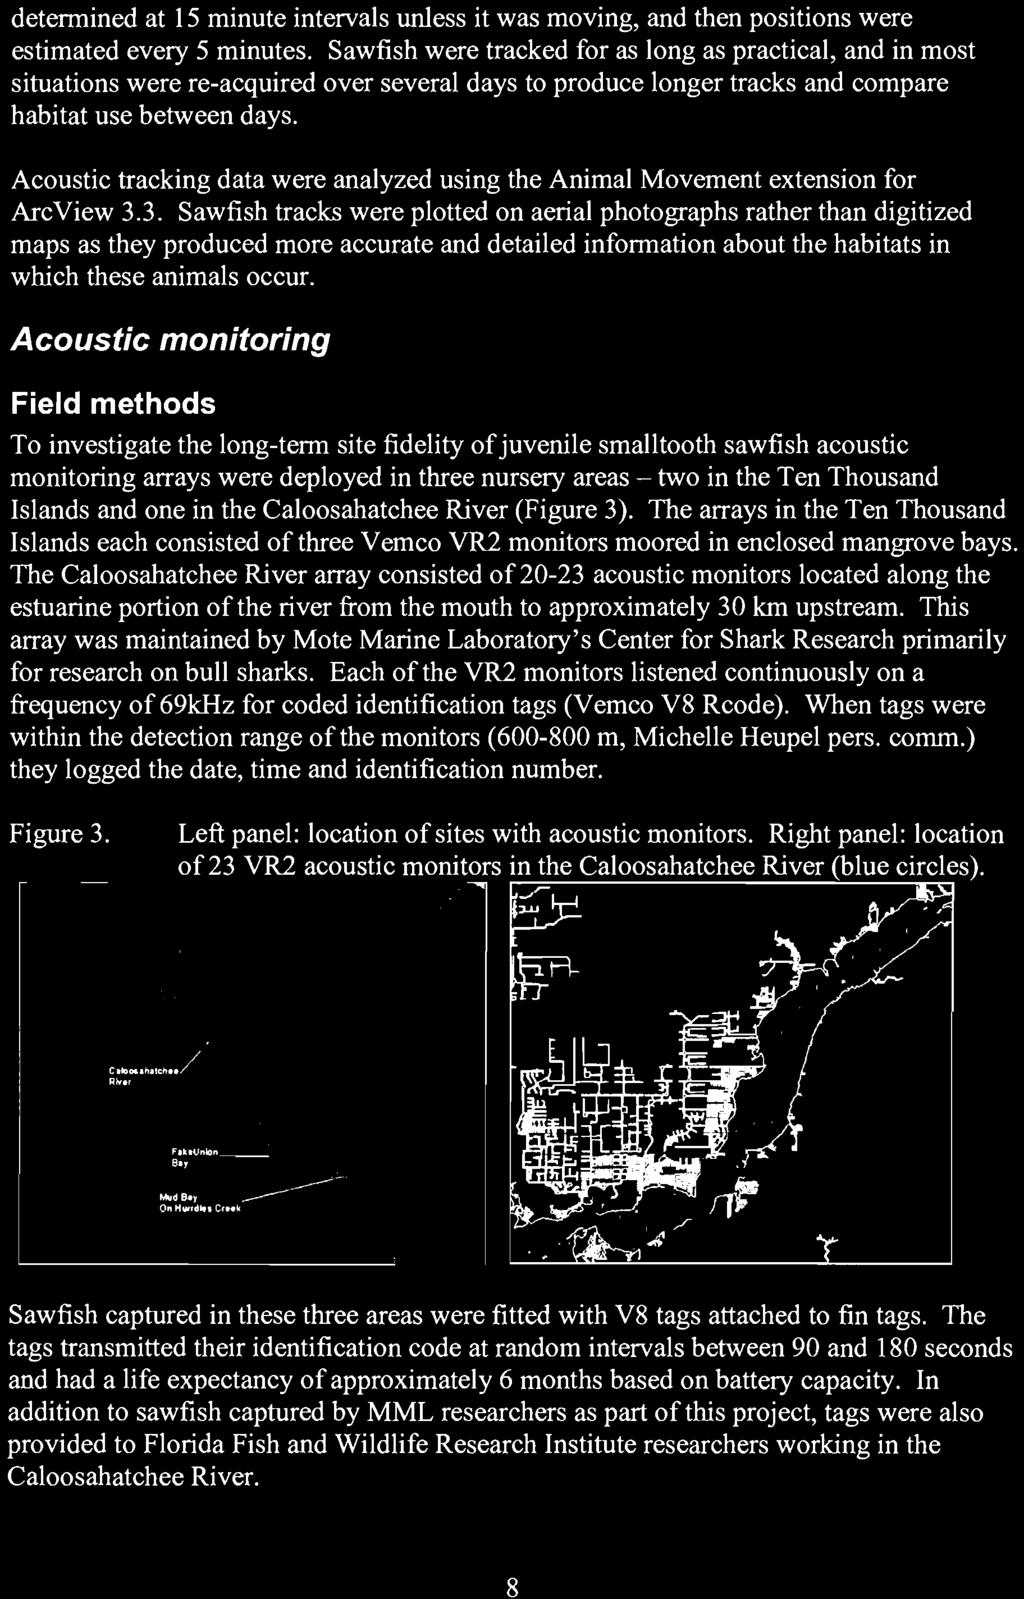 The Caloosahatchee River array consisted of 20-23 acoustic monitors located along the estuarine portion of the river from the mouth to approximately 30 km upstream.